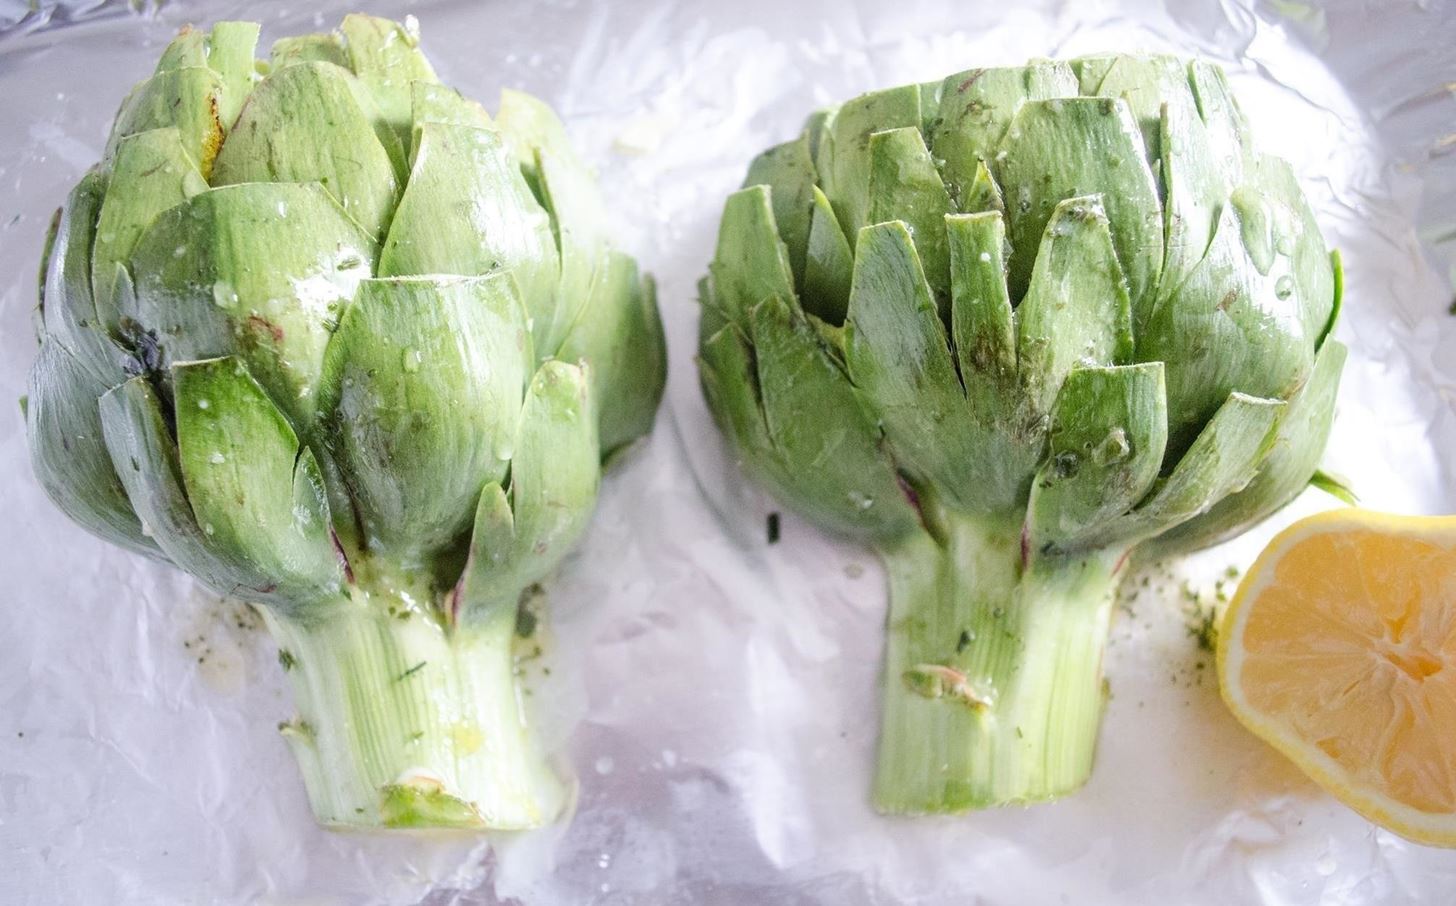 The Absolute Best Way to Prepare & Cook Artichokes